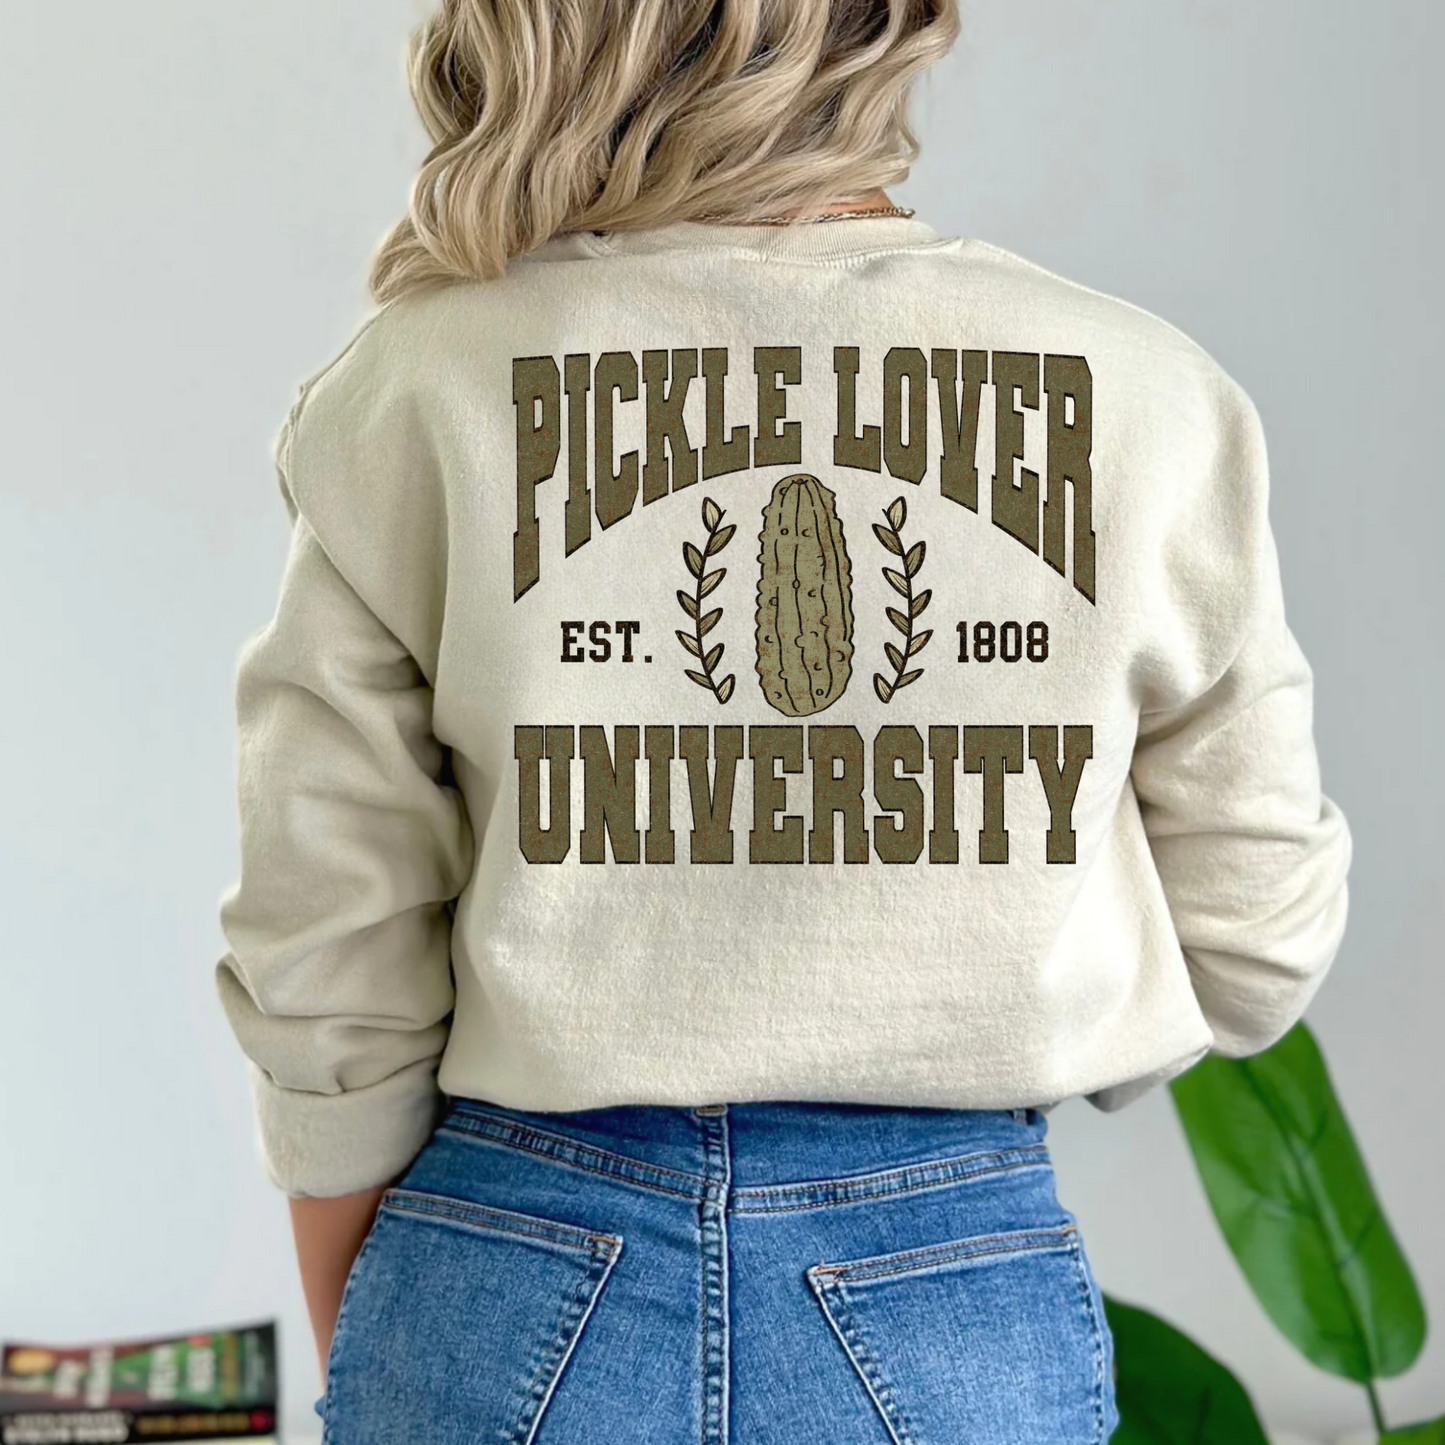 (Shirt not included) Pickle Lover University -  Matte Clear Film Transfer